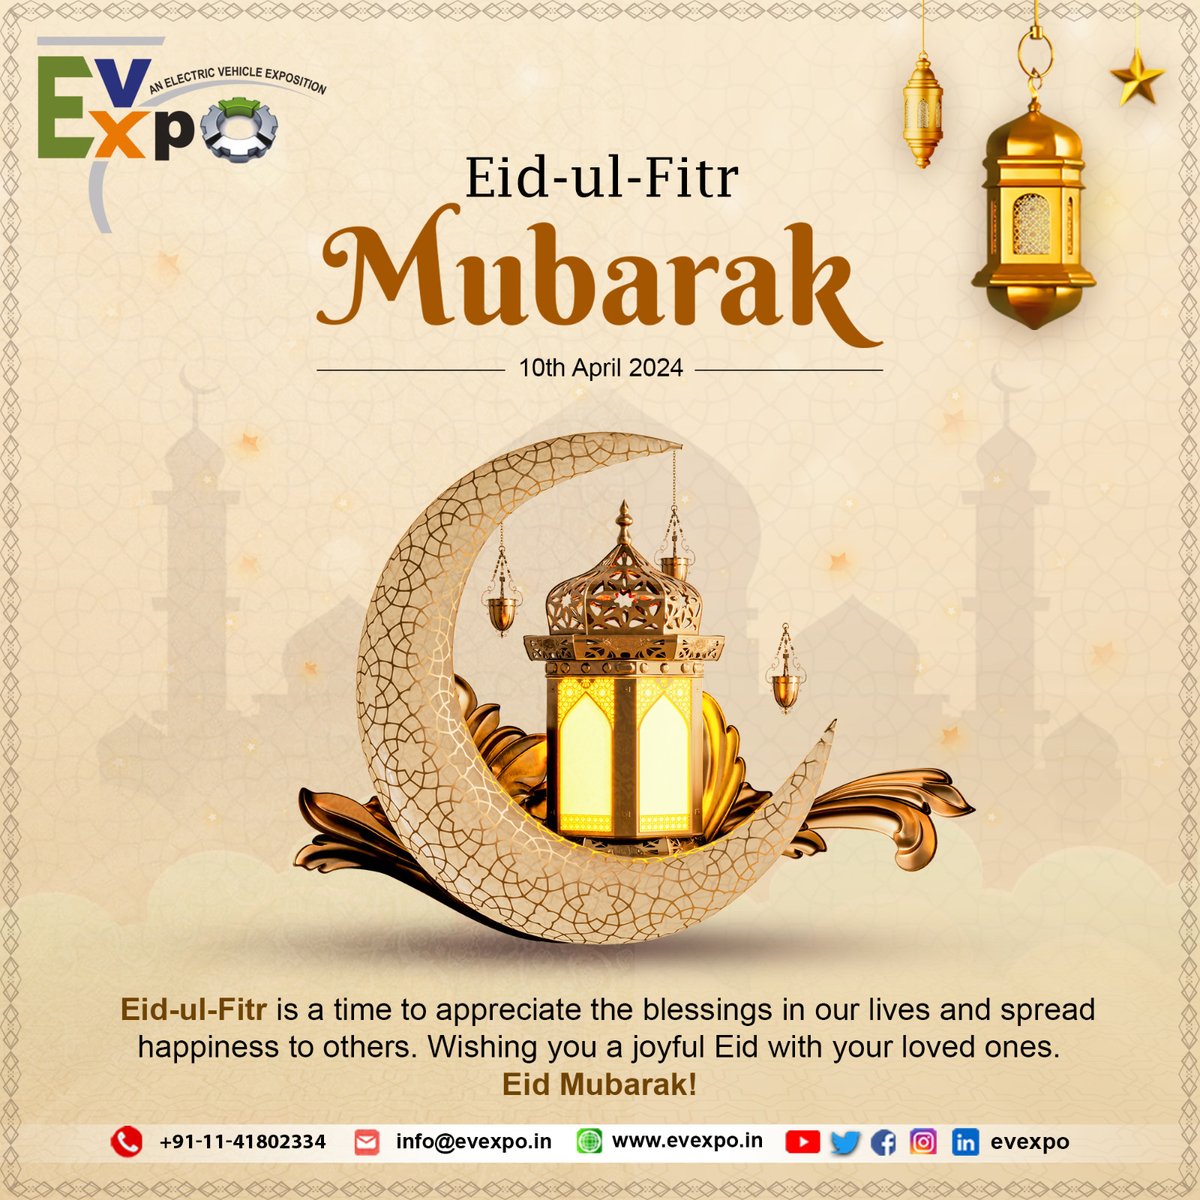 'Eid ul Fitr Mubarak! 🌙✨ Wishing everyone joy, peace, and prosperity on this blessed occasion. As the Electric Vehicle Expo (EvExpo) celebrates innovation and sustainability, let's also embrace the spirit of unity and compassion. 

#EidMubarak  #Sustainability  #EidulFitr2024